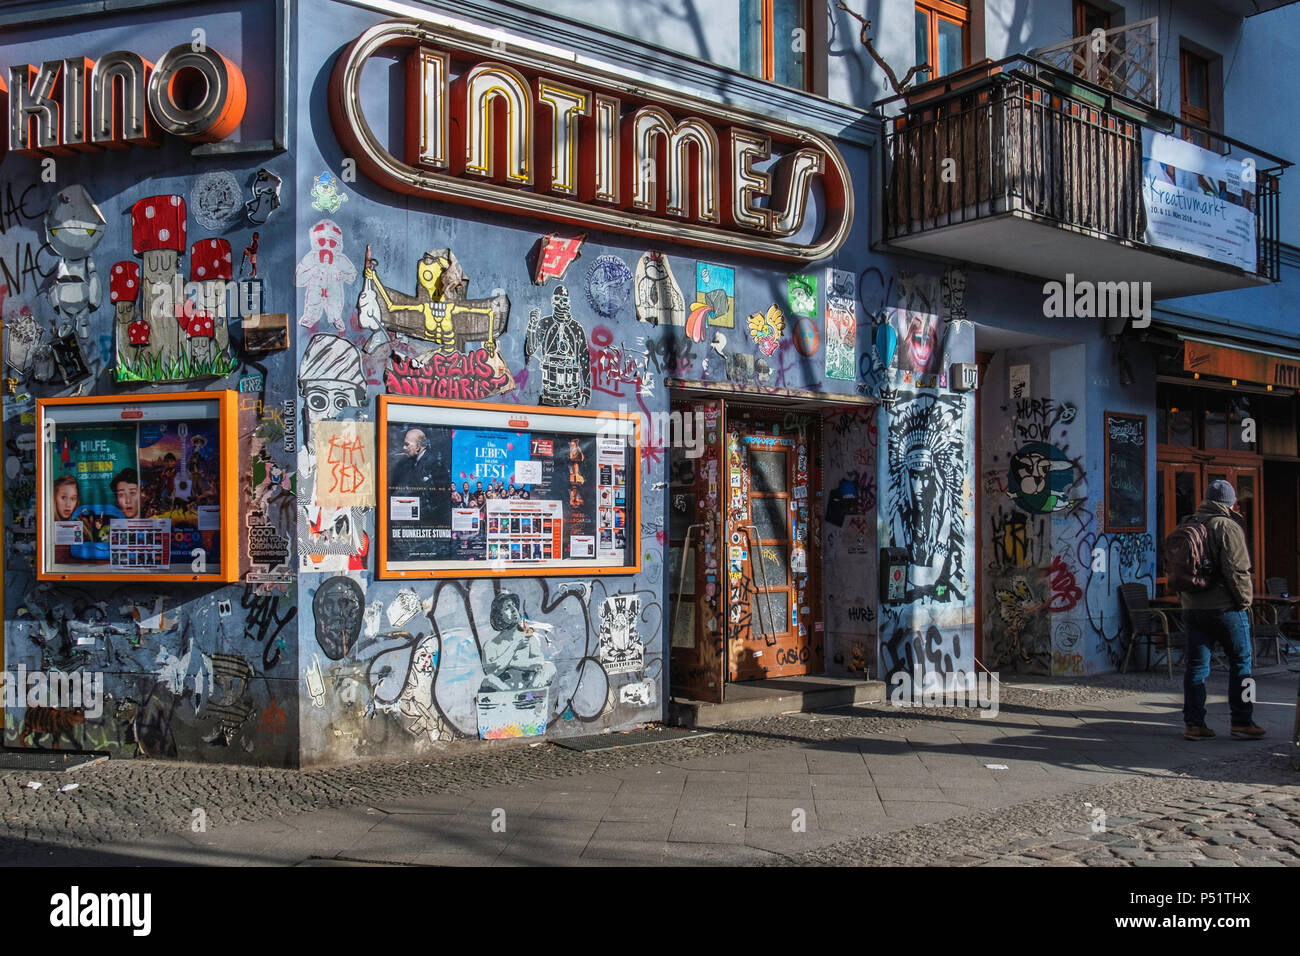 Berlin, Friedrichshain-Kreuzberg, Intimes Cinema exterior. Graffiti-covered  facade of Art-House movie theatre founded 1909 in a small shop Stock Photo  - Alamy